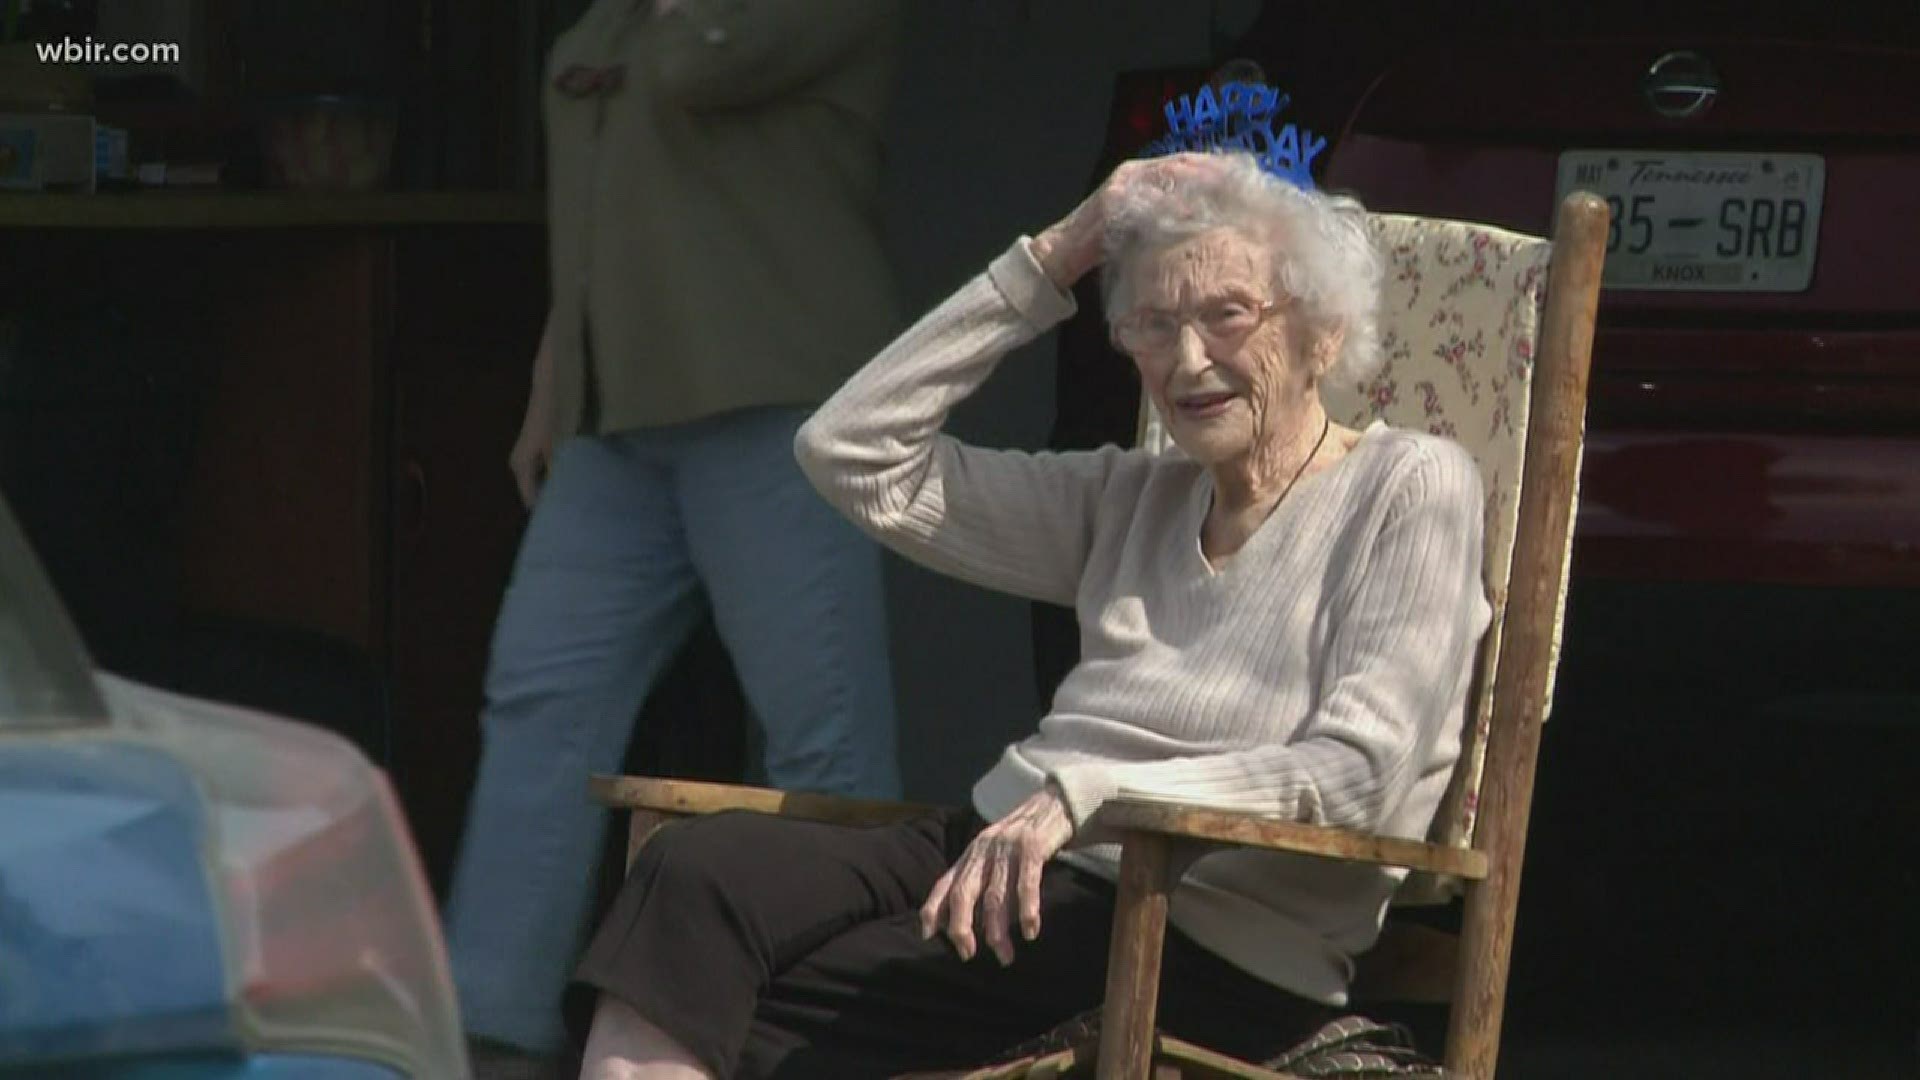 Joanna Venable sat in her rocker in her driveway on Wednesday to watch everyone drive by and wish her a happy birthday.